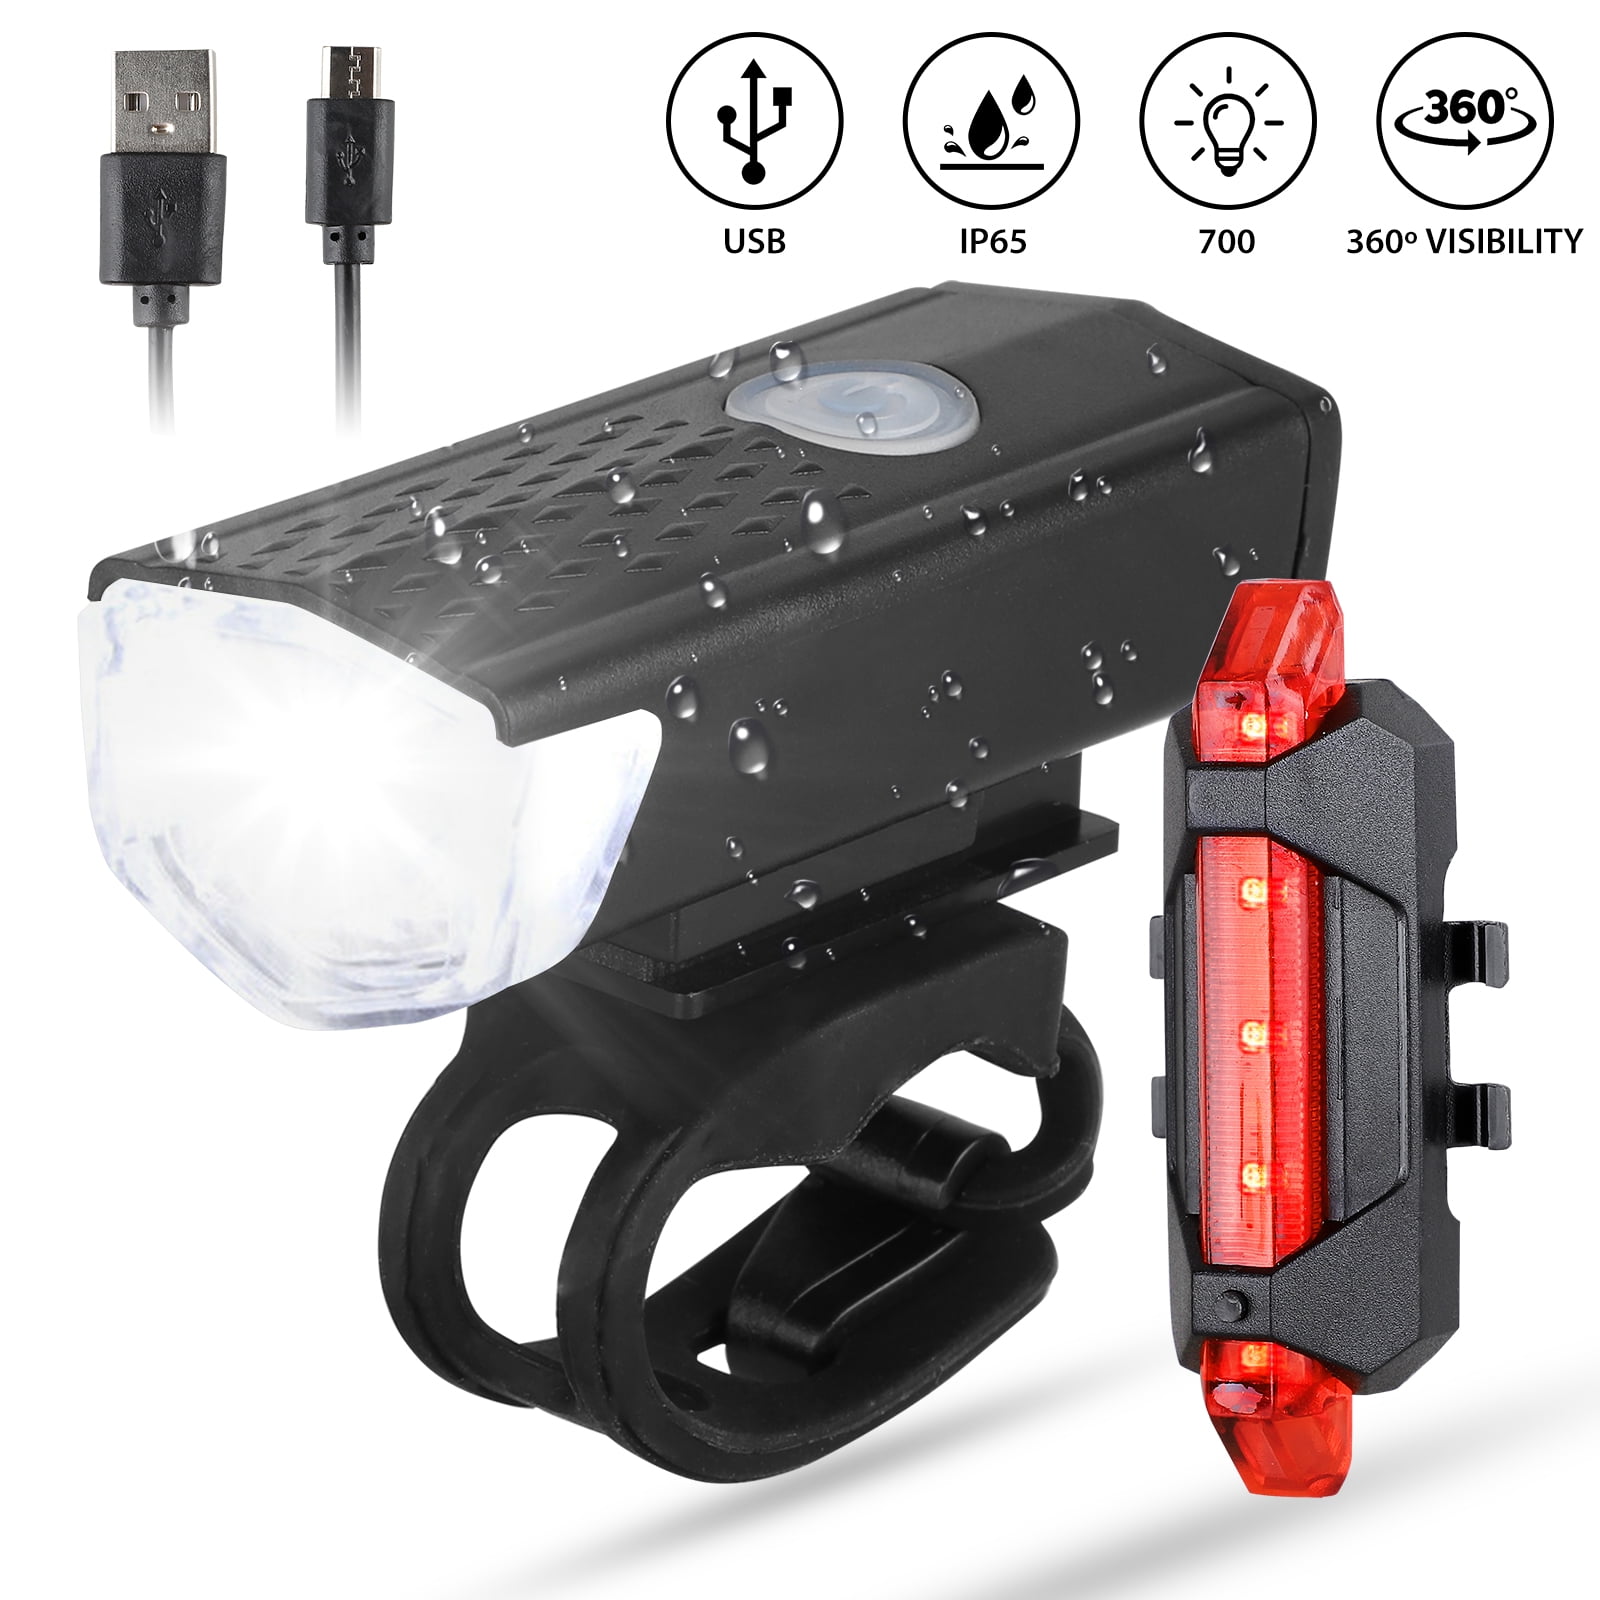 Super Bright USB Rechargeable Bicycle Lights,Waterproof Mountain Bike Light Set.